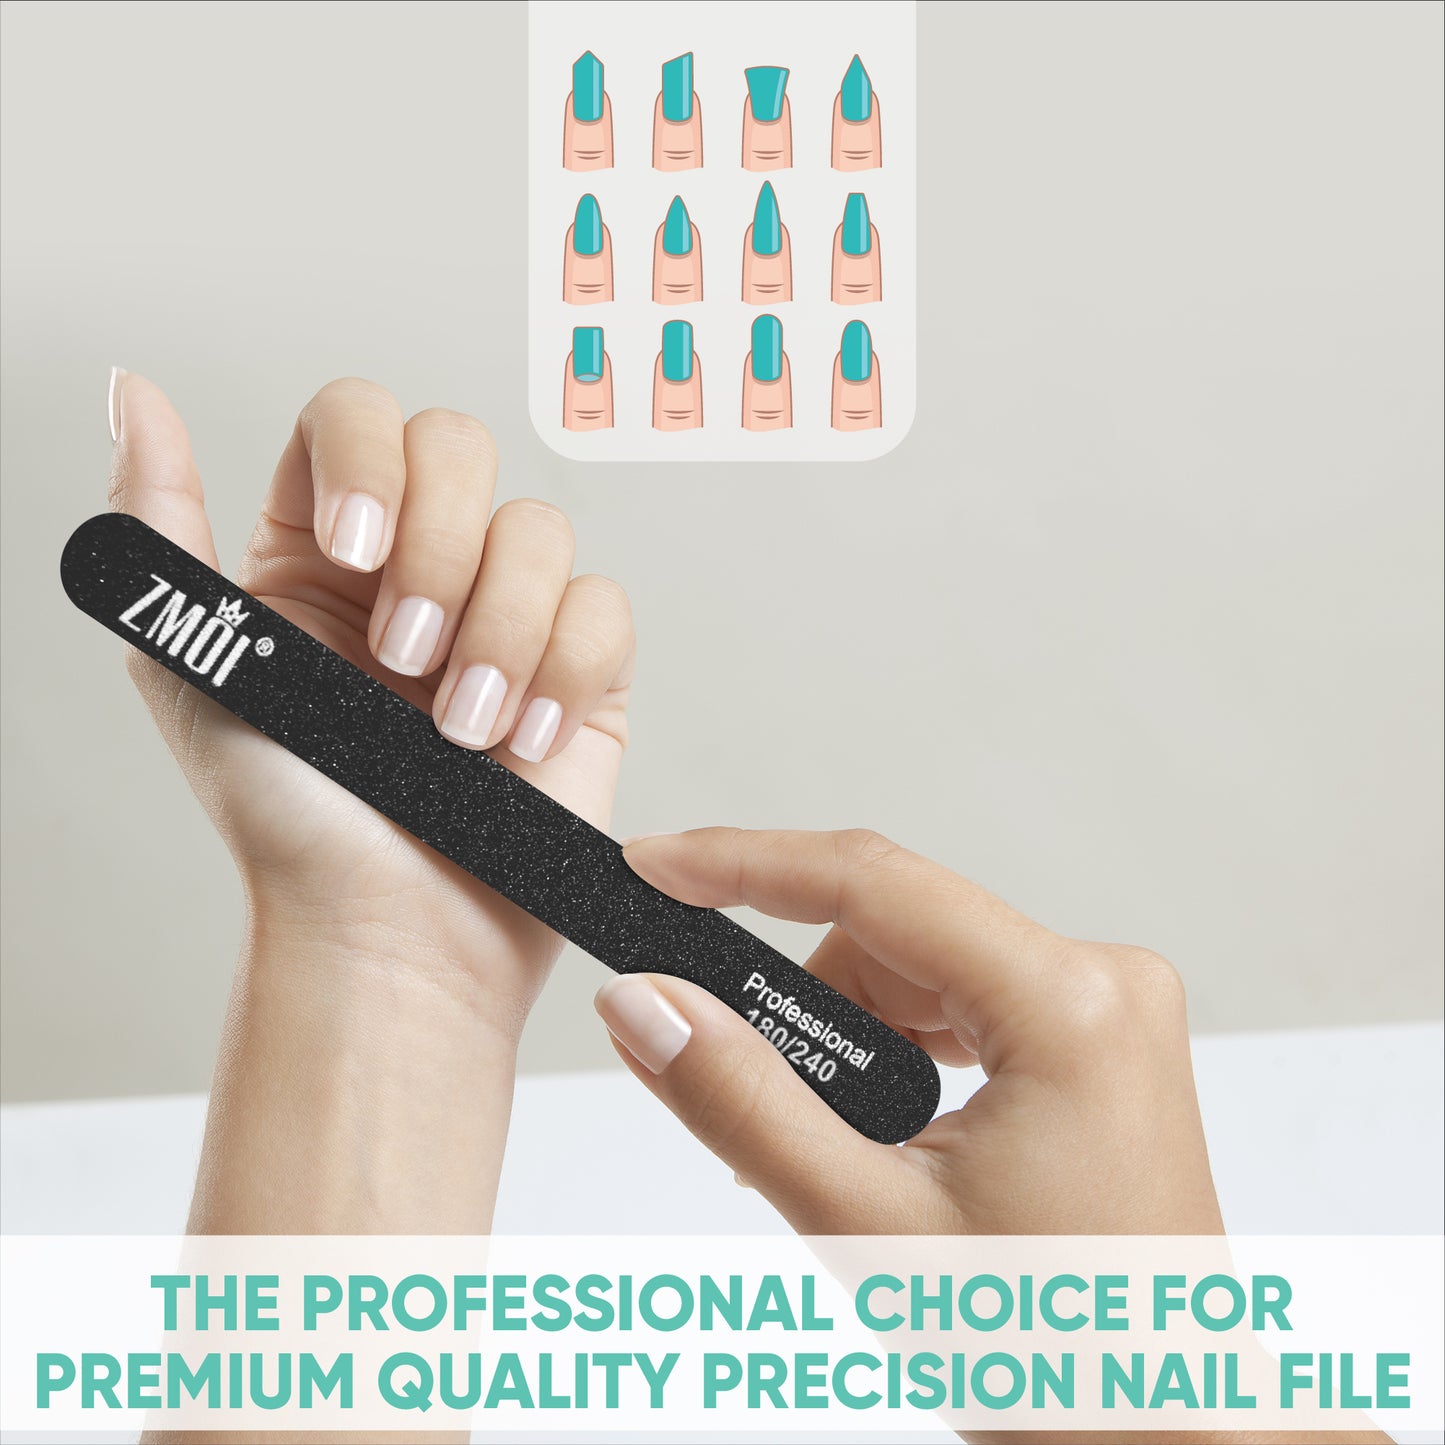 Professional Nail Files 12 Durable Design Ergonomic and Practical 180/240 Grit